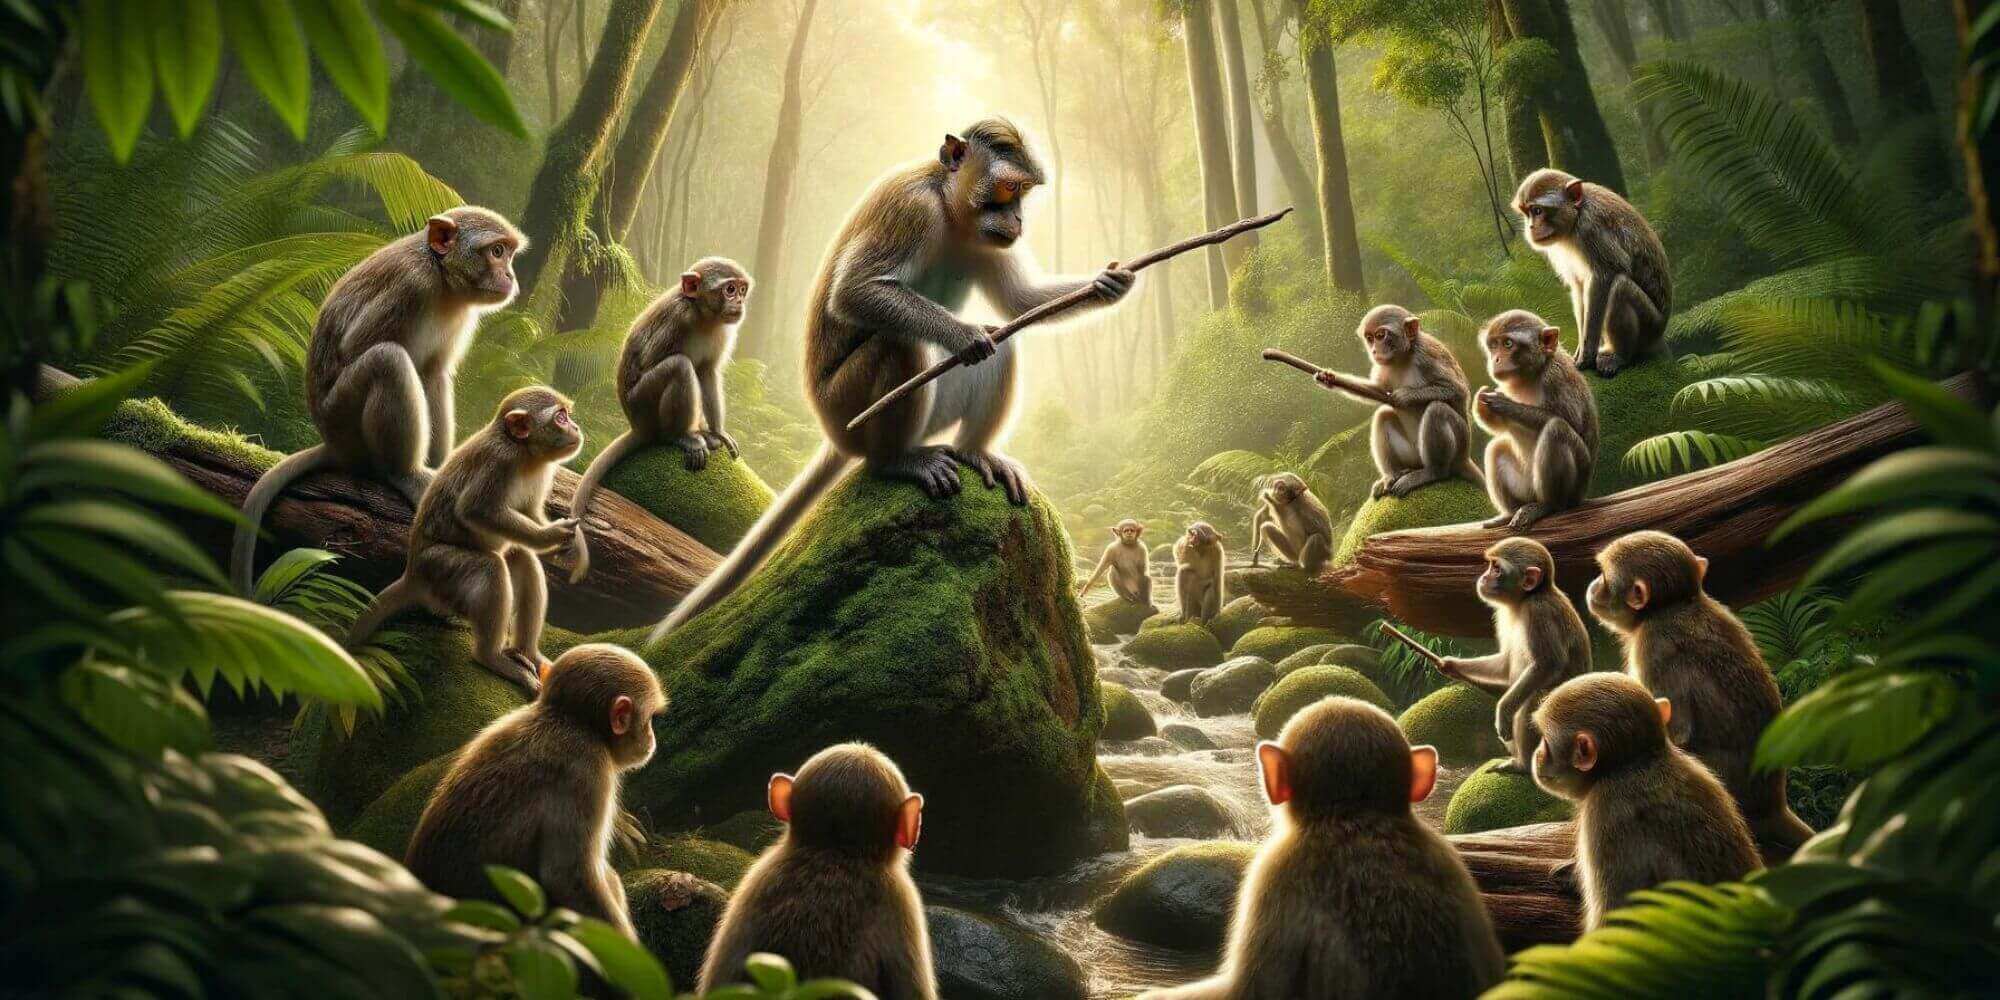 Monkey see, monkey depicted as 1 monkey showing how to use a stick to others.